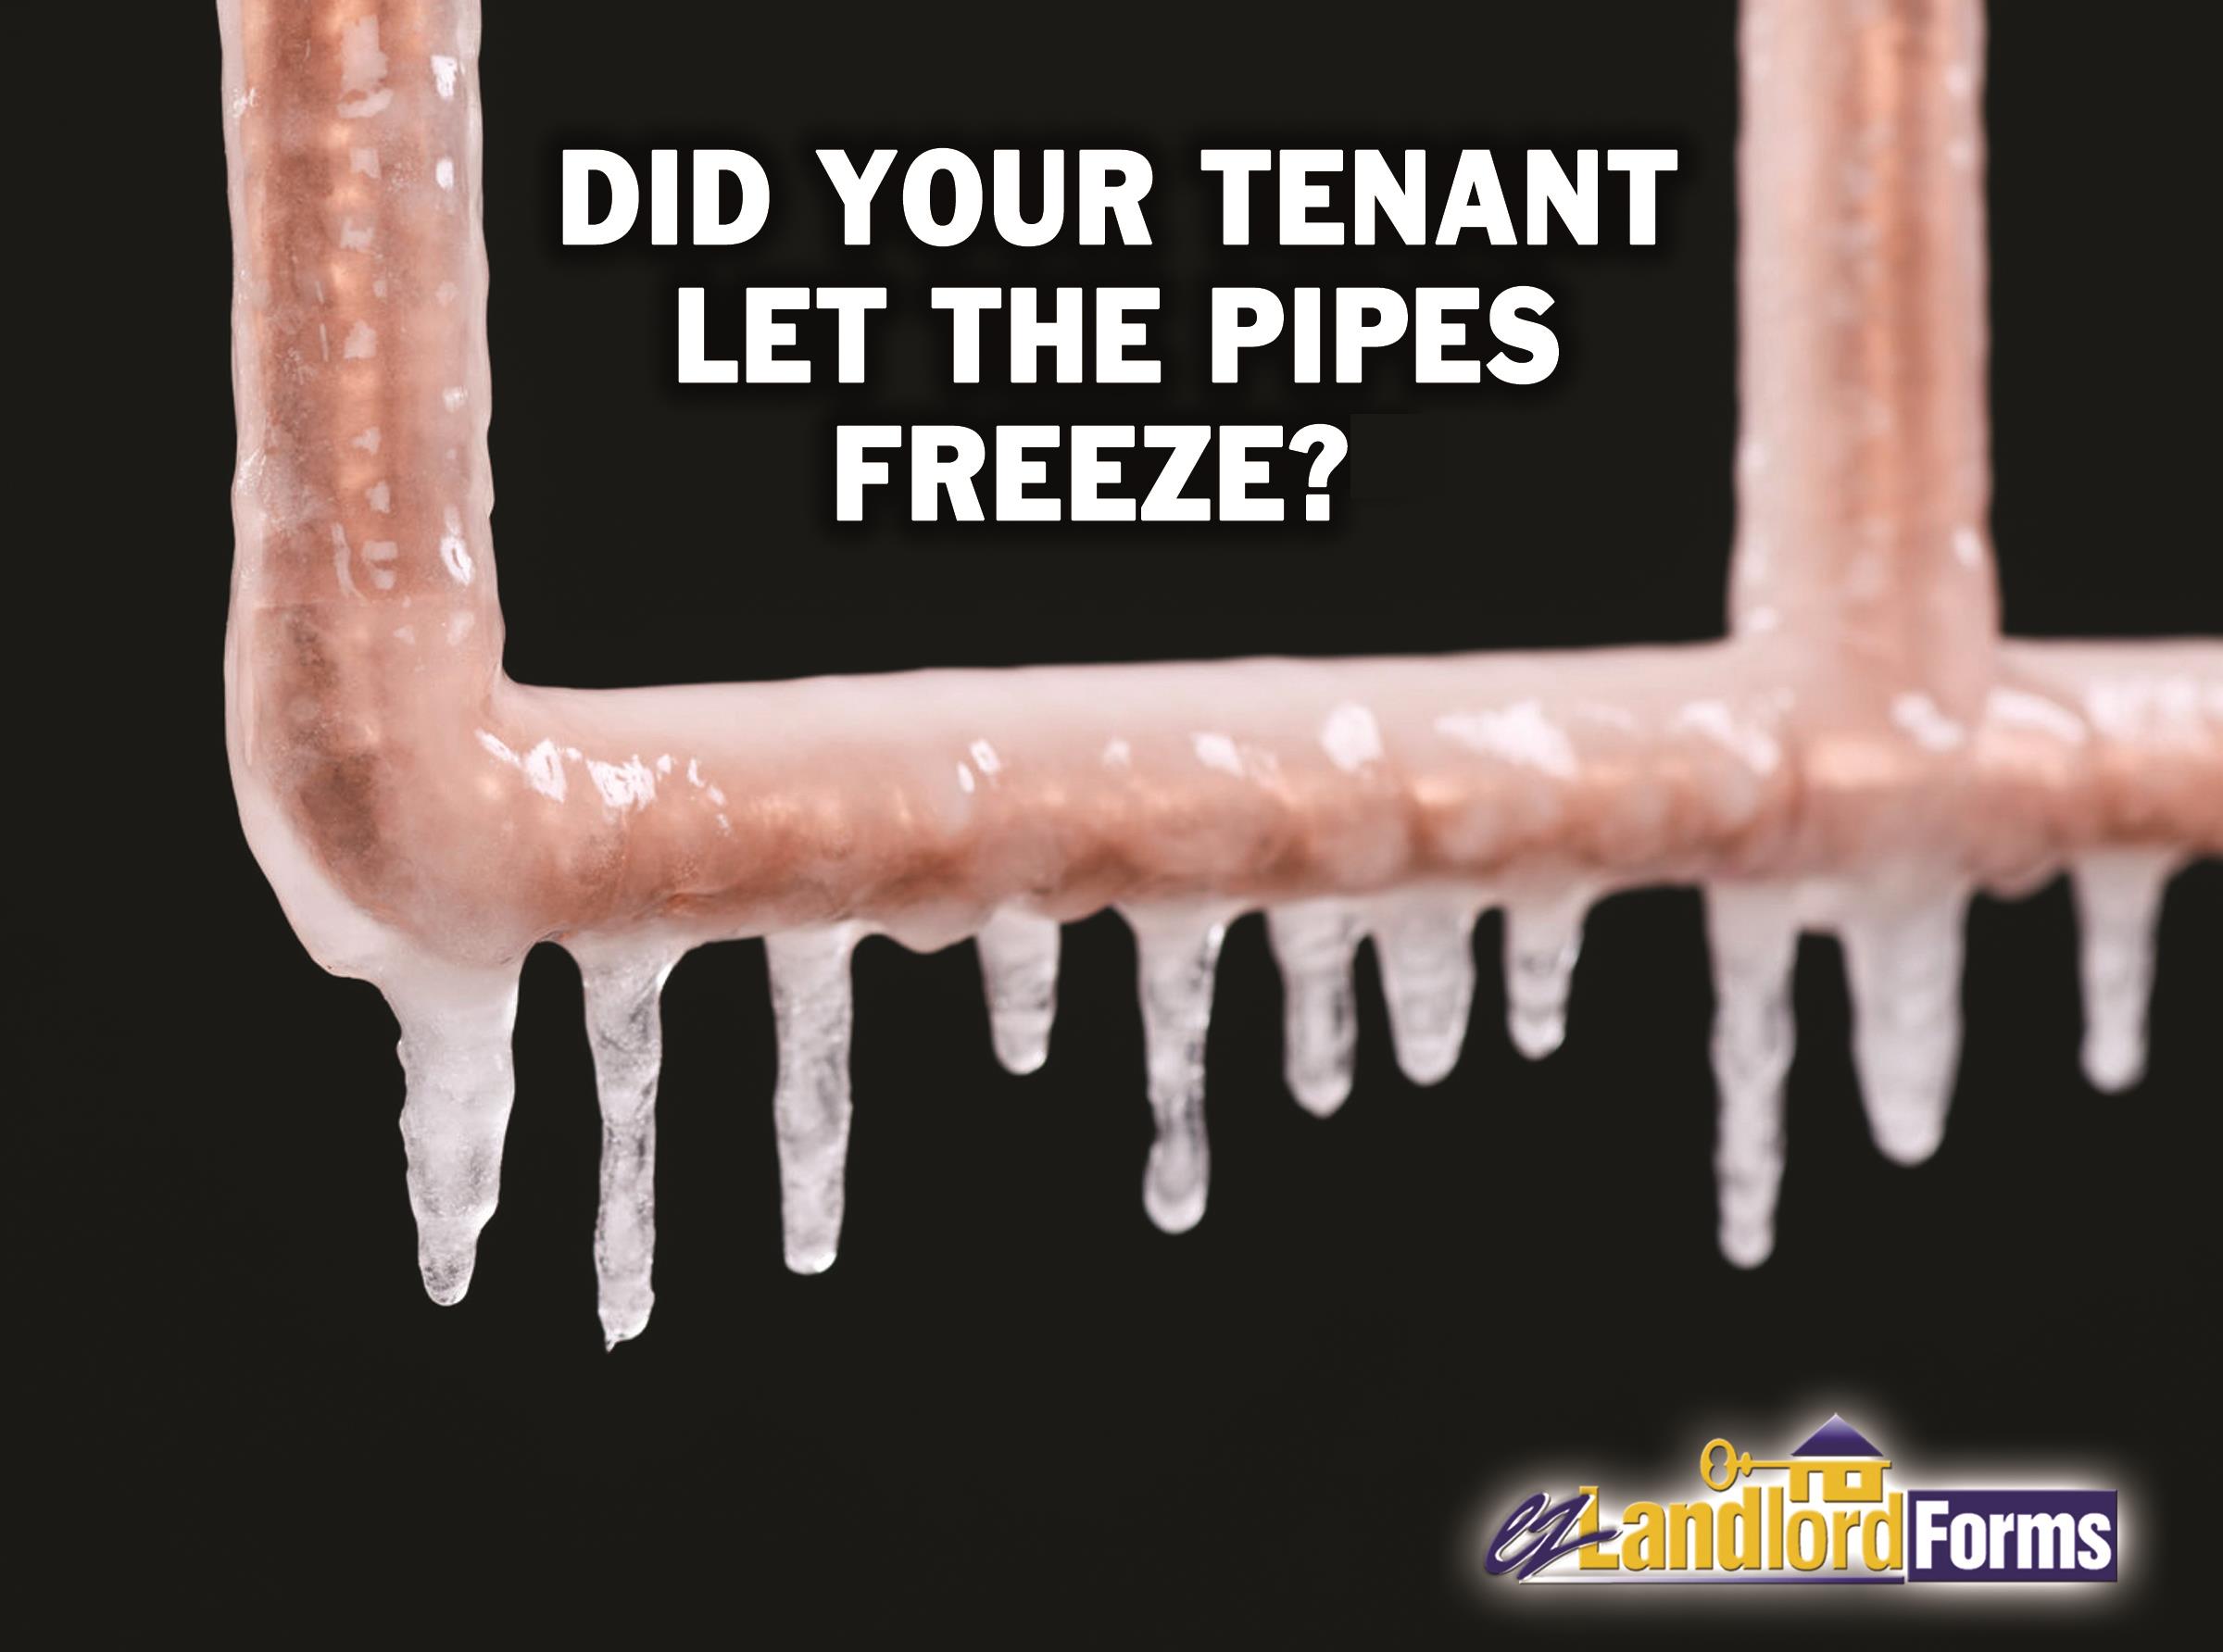 Did_Your_Tenant_Let_the_Pipes_Freeze_10-11-17